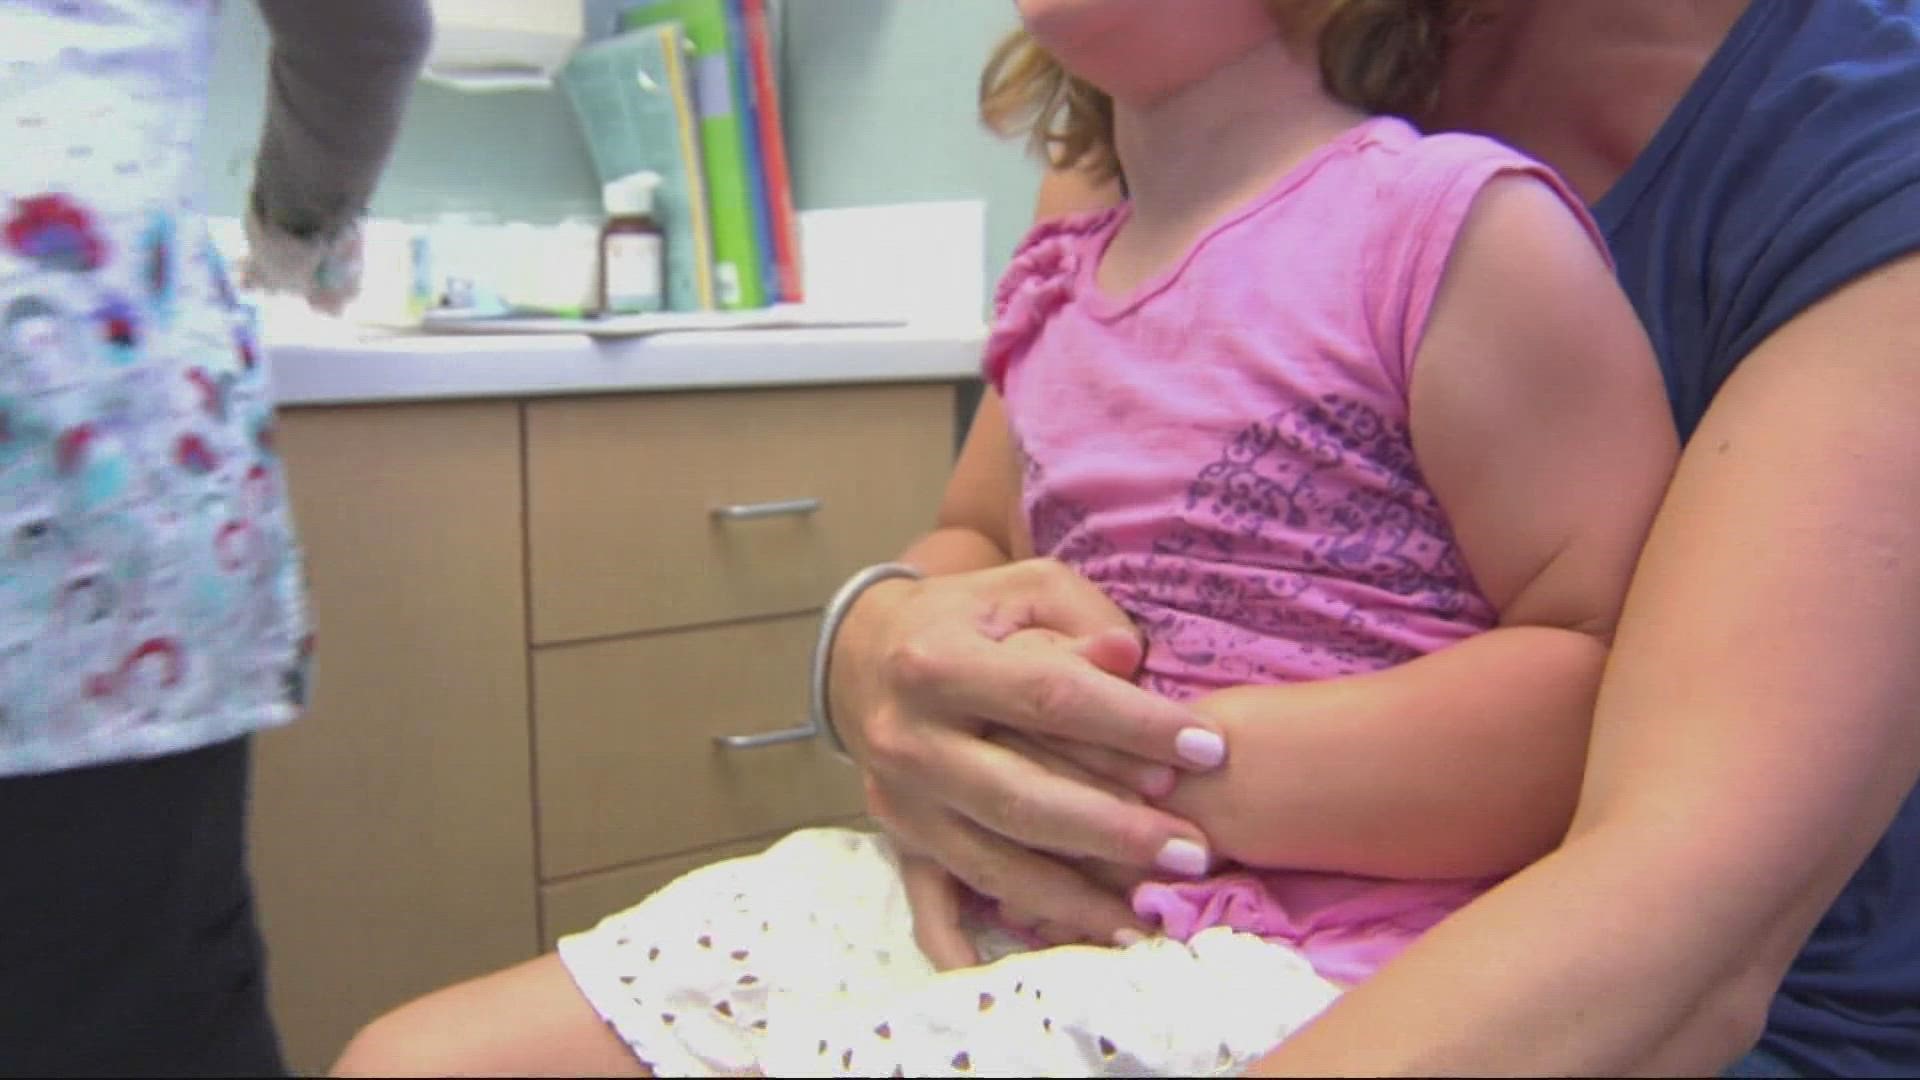 As soon as next week, kids between the ages of 6 months and 5 years may be rolling up their sleeves for a COVID shot. KGW’s Mike Benner has the story.